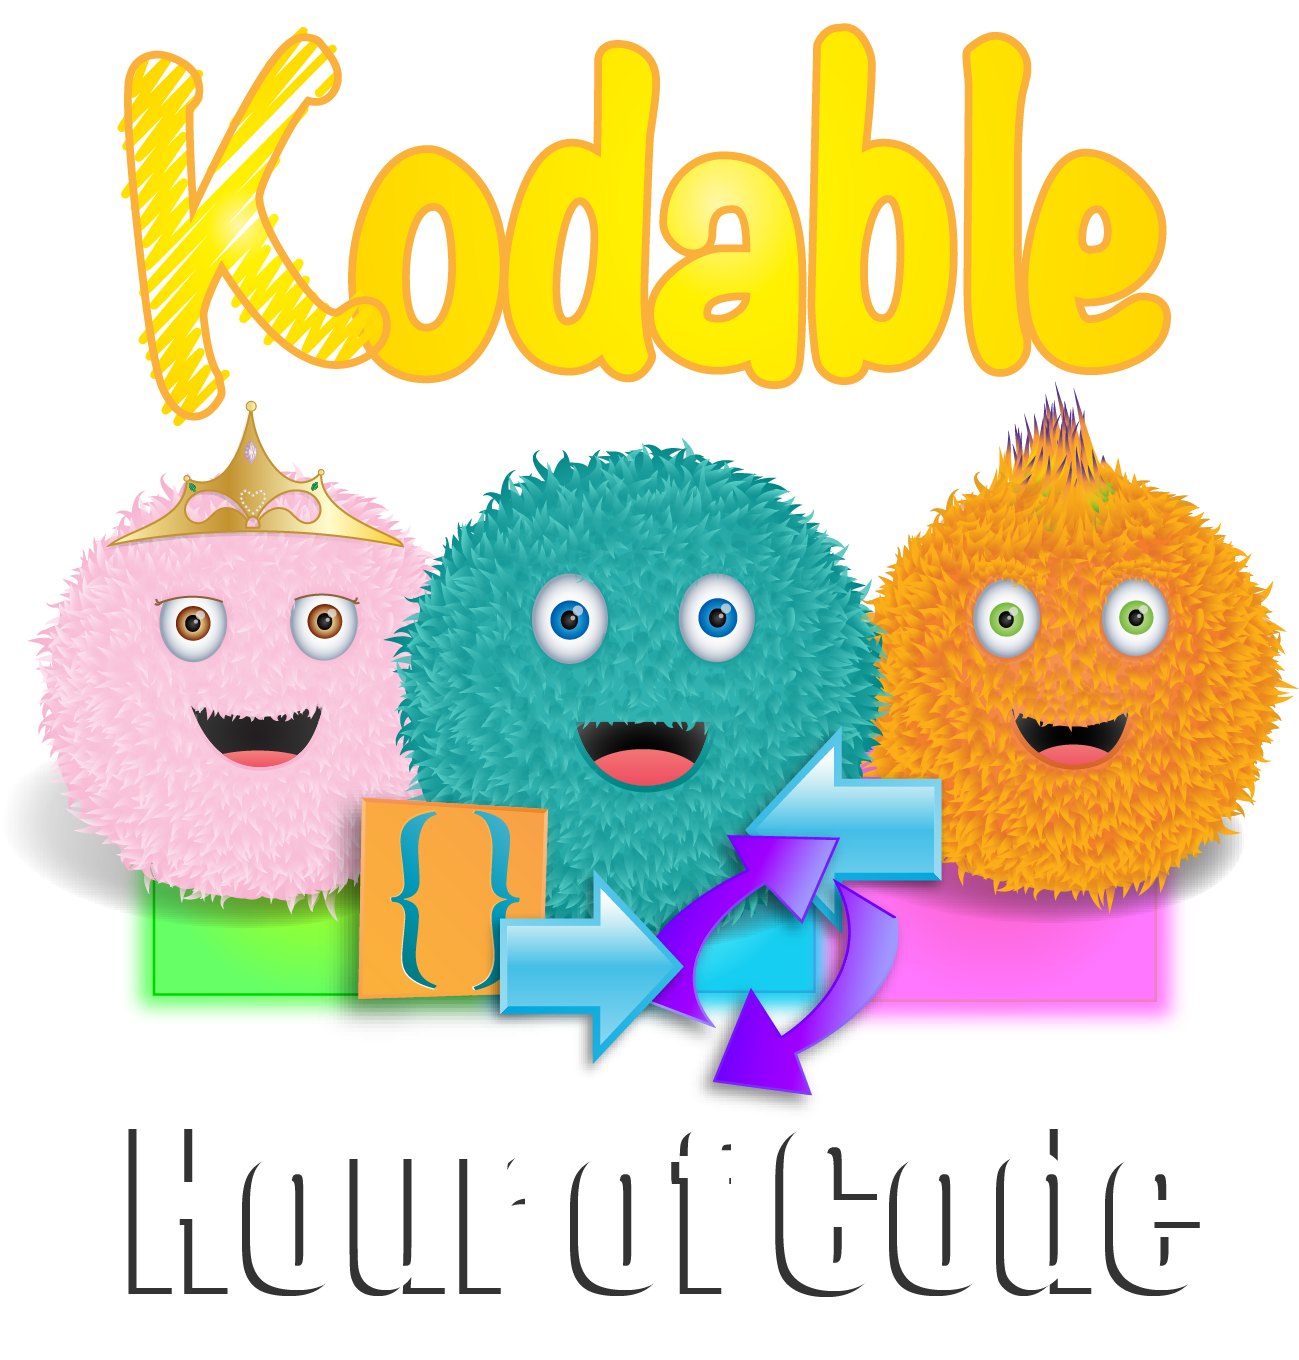 Website clipart first computer. Coding for kids kodable